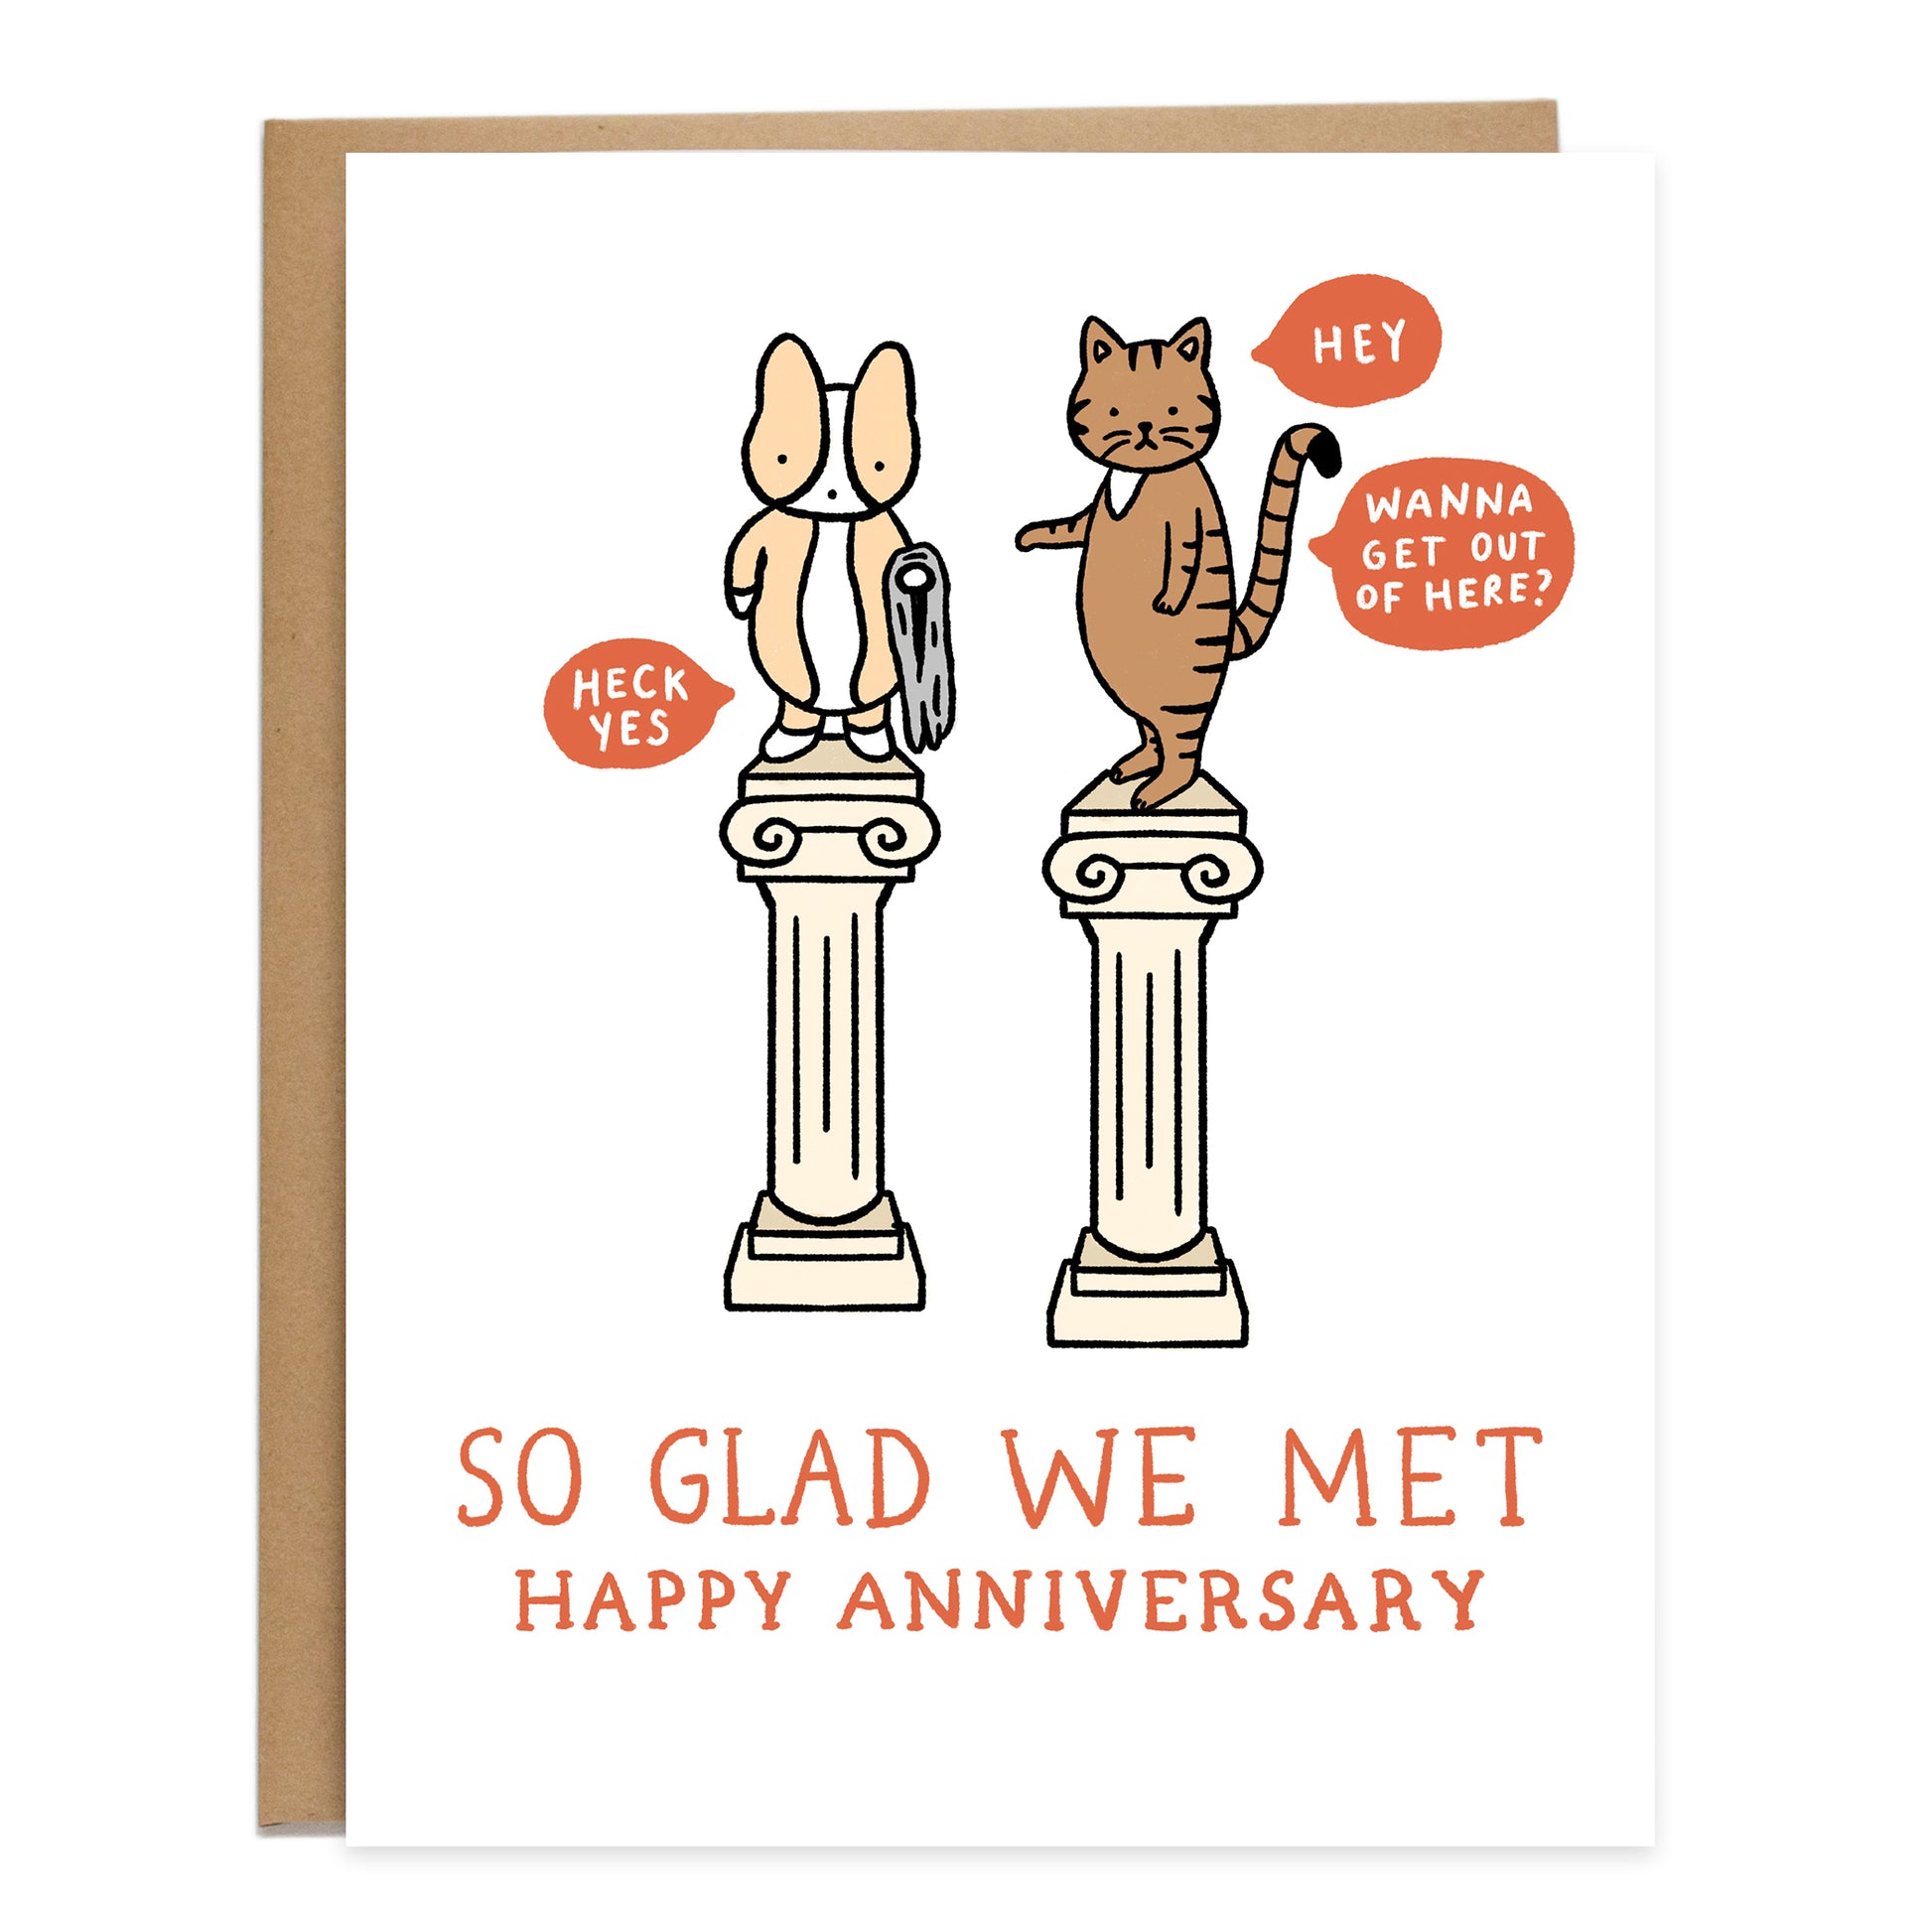 A drawing of a corgi and brown tabby cat on top of stone columns. The cat asks, hey wanna get out of here? and the corgi answers, heck yes. The card reads, So glad we met, happy anniversary